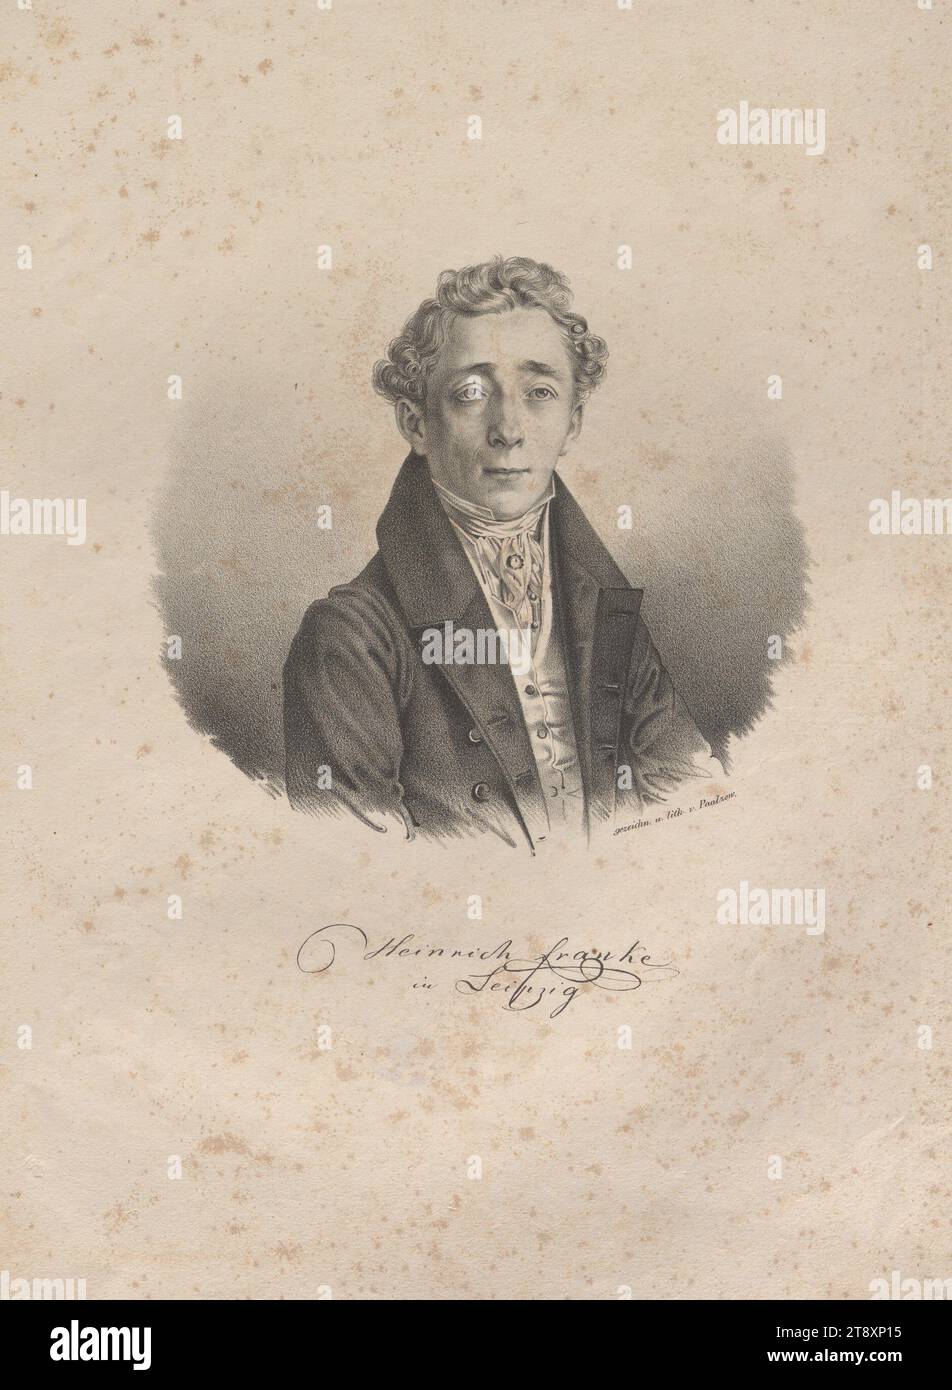 Heinrich Franke in Leipzig, Carl Eduard Albert Paalzow, lithographer, dated about 1830, paper, lithograph, height 36 cm, width 26.8 cm, fine arts, estate of Constantin von Wurzbach, portrait, man, The Vienna Collection Stock Photo